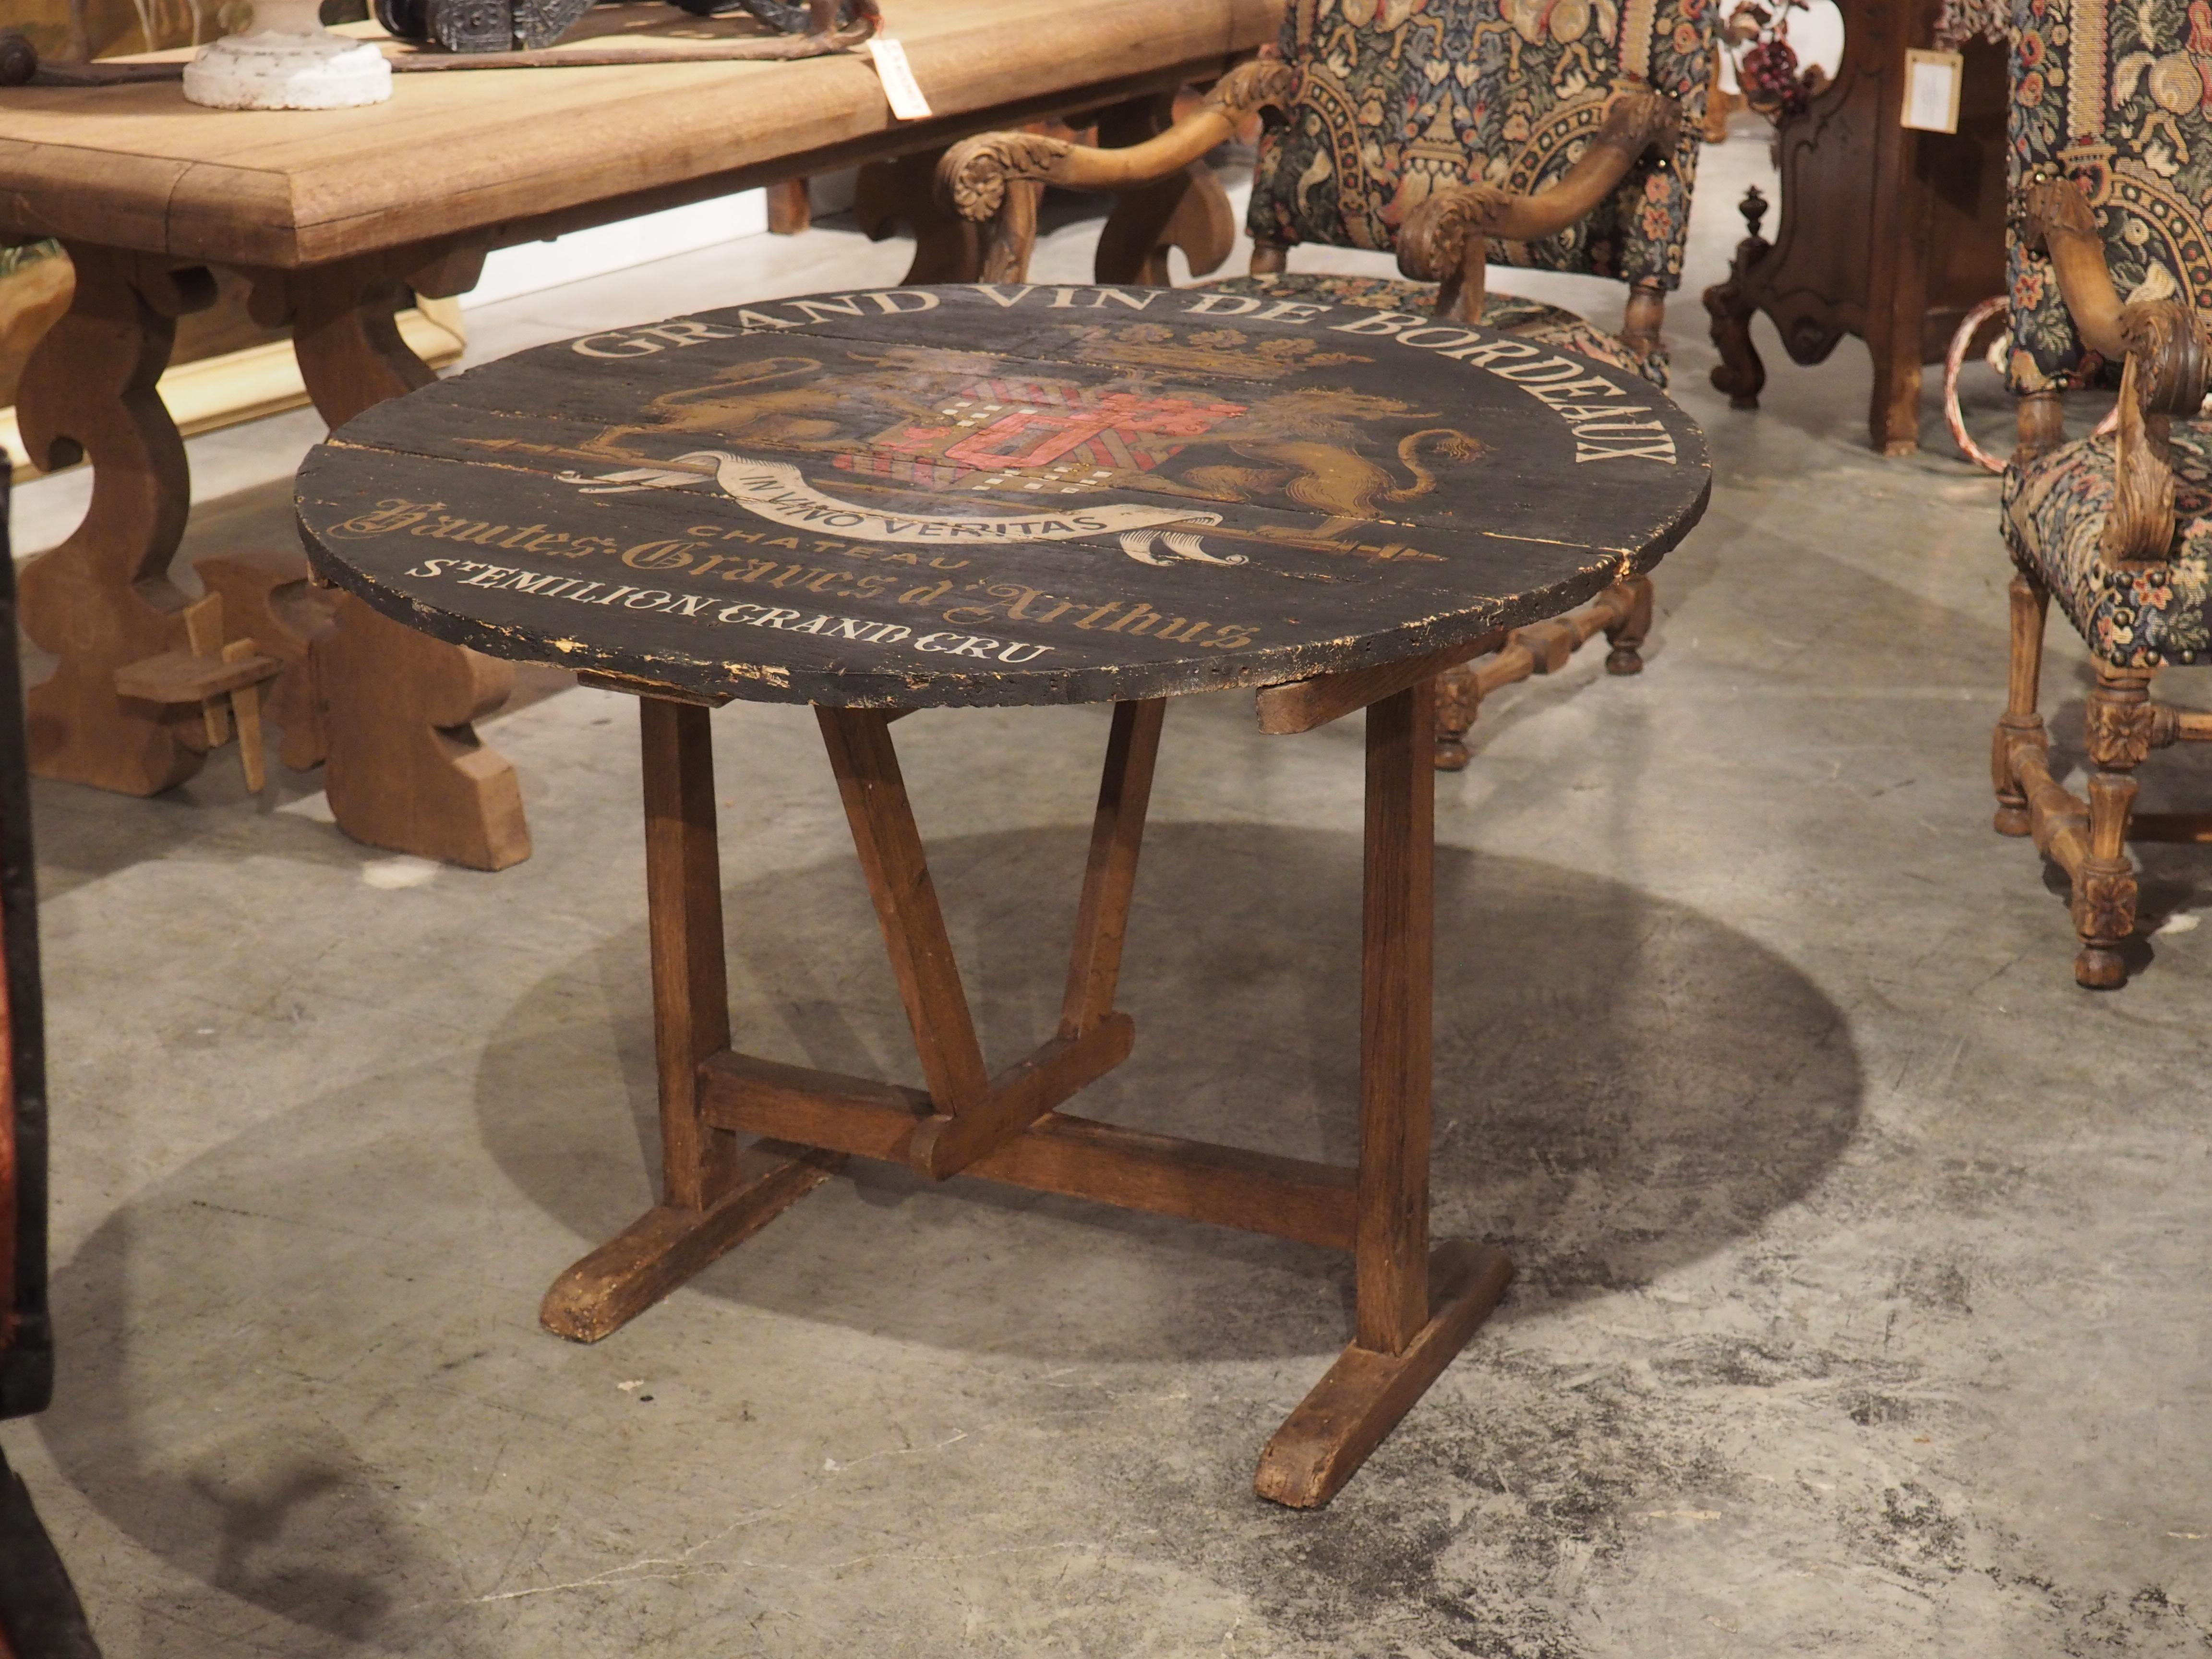 Hand-carved in the late 1800’s, this wine tasting table was produced in typical French fashion: as a circular table with a flip-top that folds down. A geometric support swivels into a locking position, allowing the table to be displayed as a